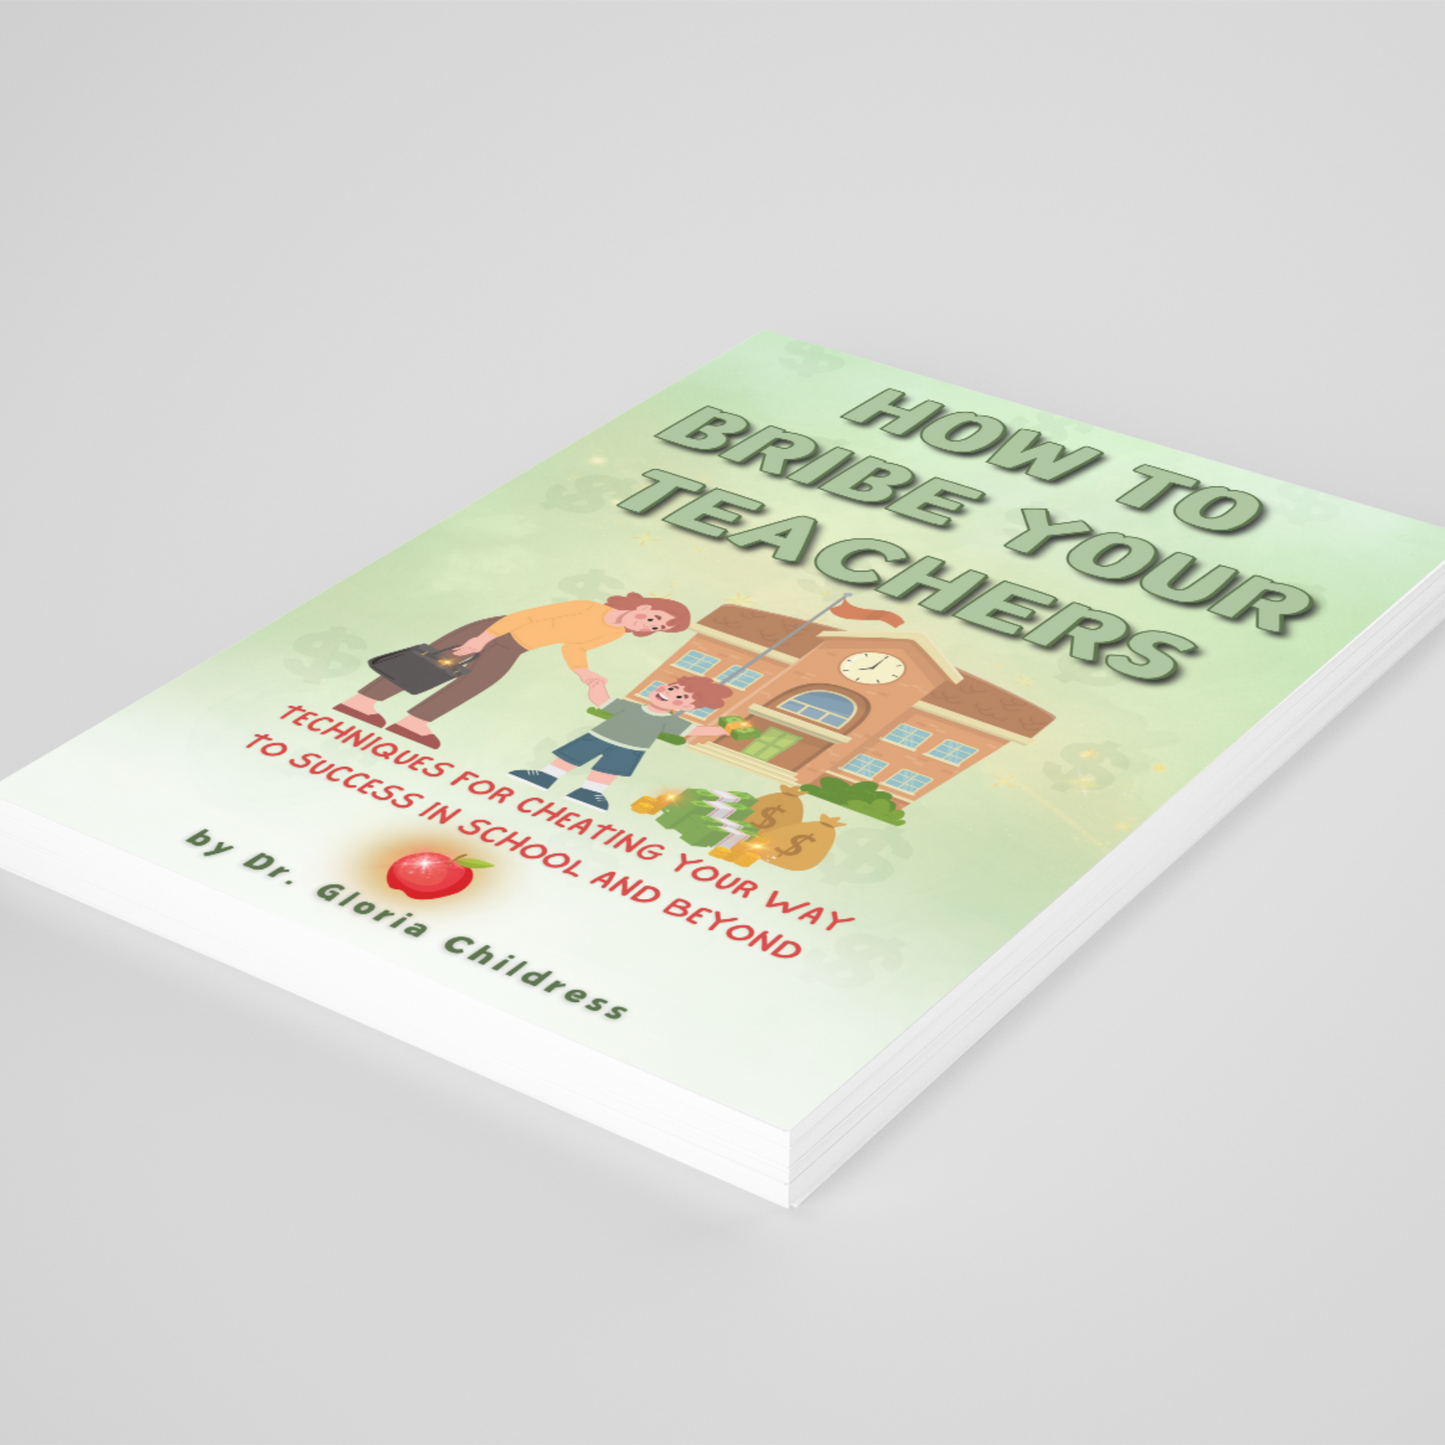 How to Bribe Your Teachers: Techniques for Cheating Your Way to Success in School and Beyond - Gag Gift Notebook For Kids